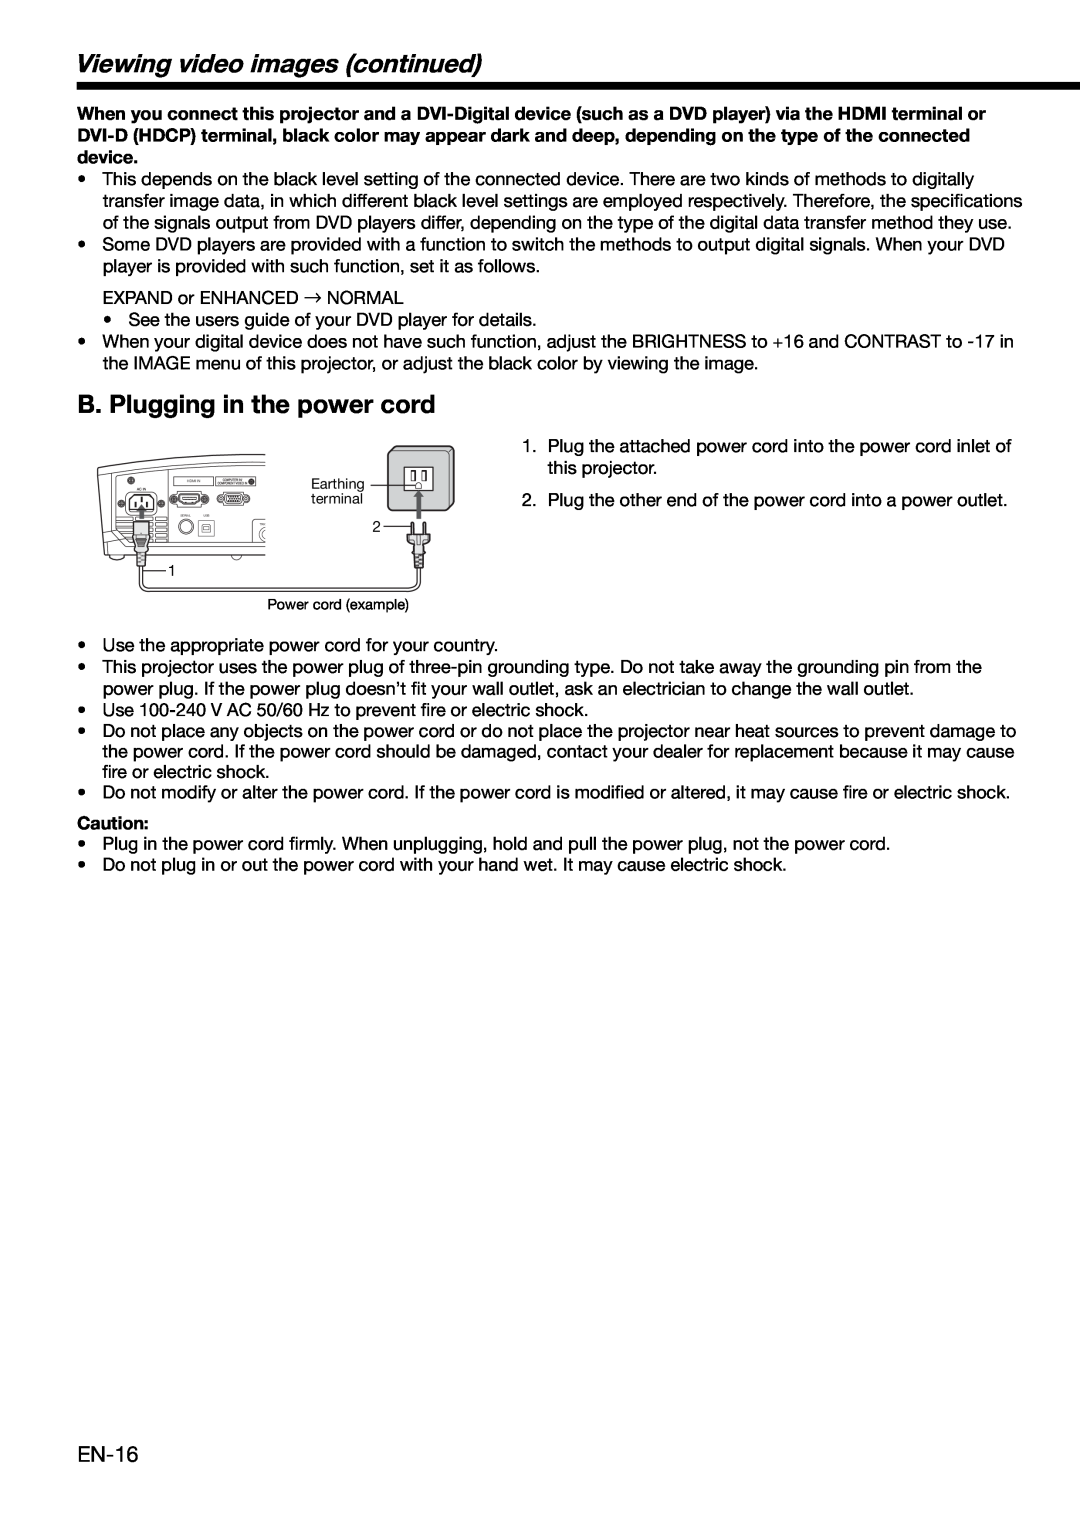 Mitsubishi HC1100 user manual B. Plugging in the power cord, Viewing video images continued, EN-16 